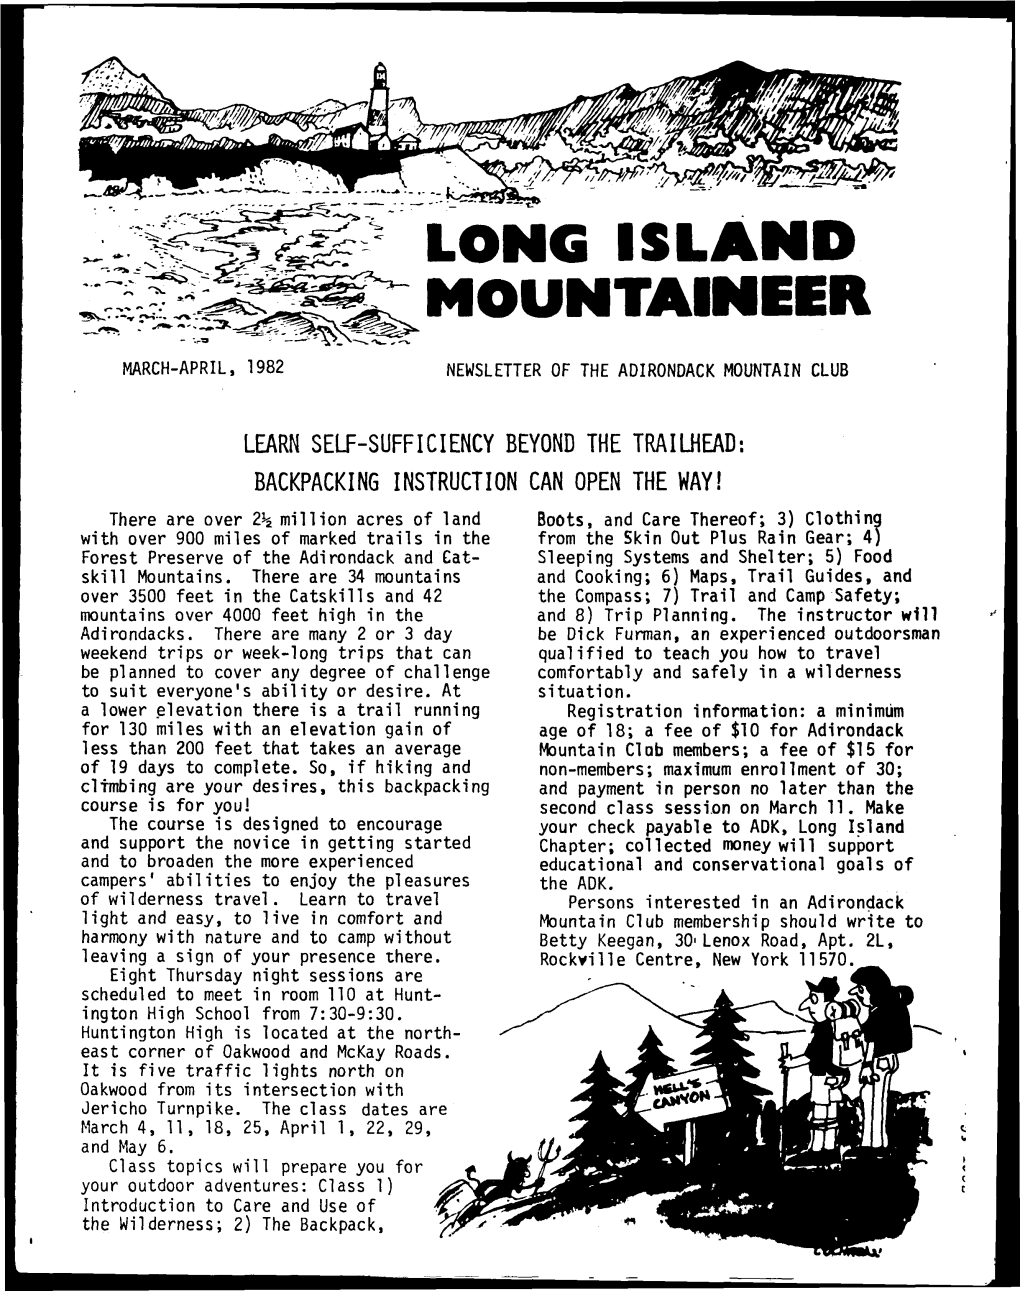 March-April, 1982 Newsletter of the Adirondack Mountain Club